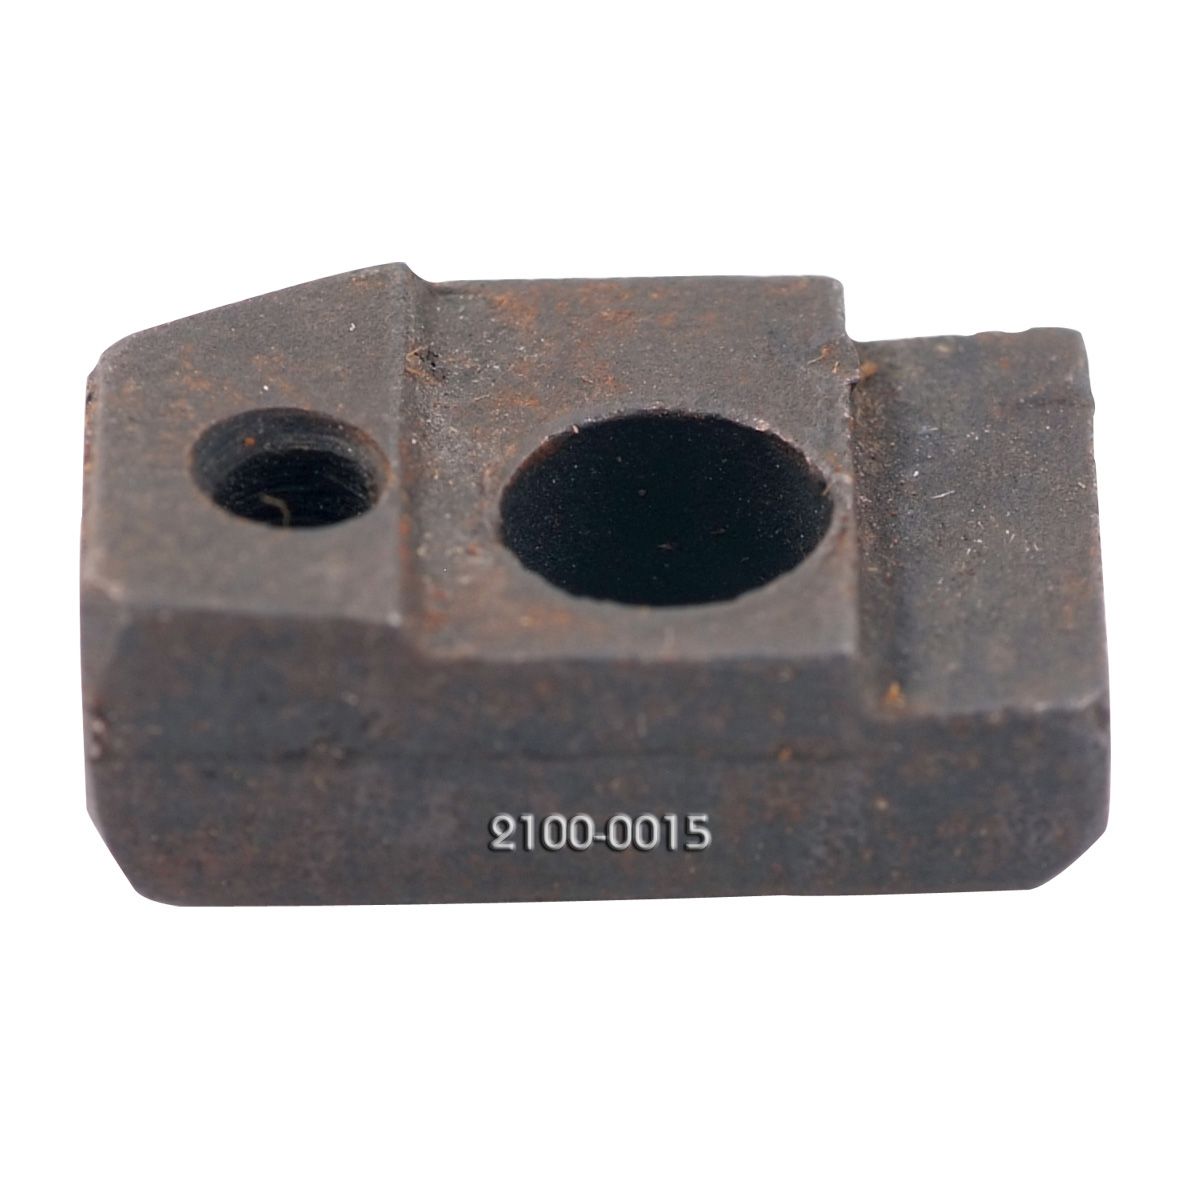 MTH0820 CLAMP (2100-0015)